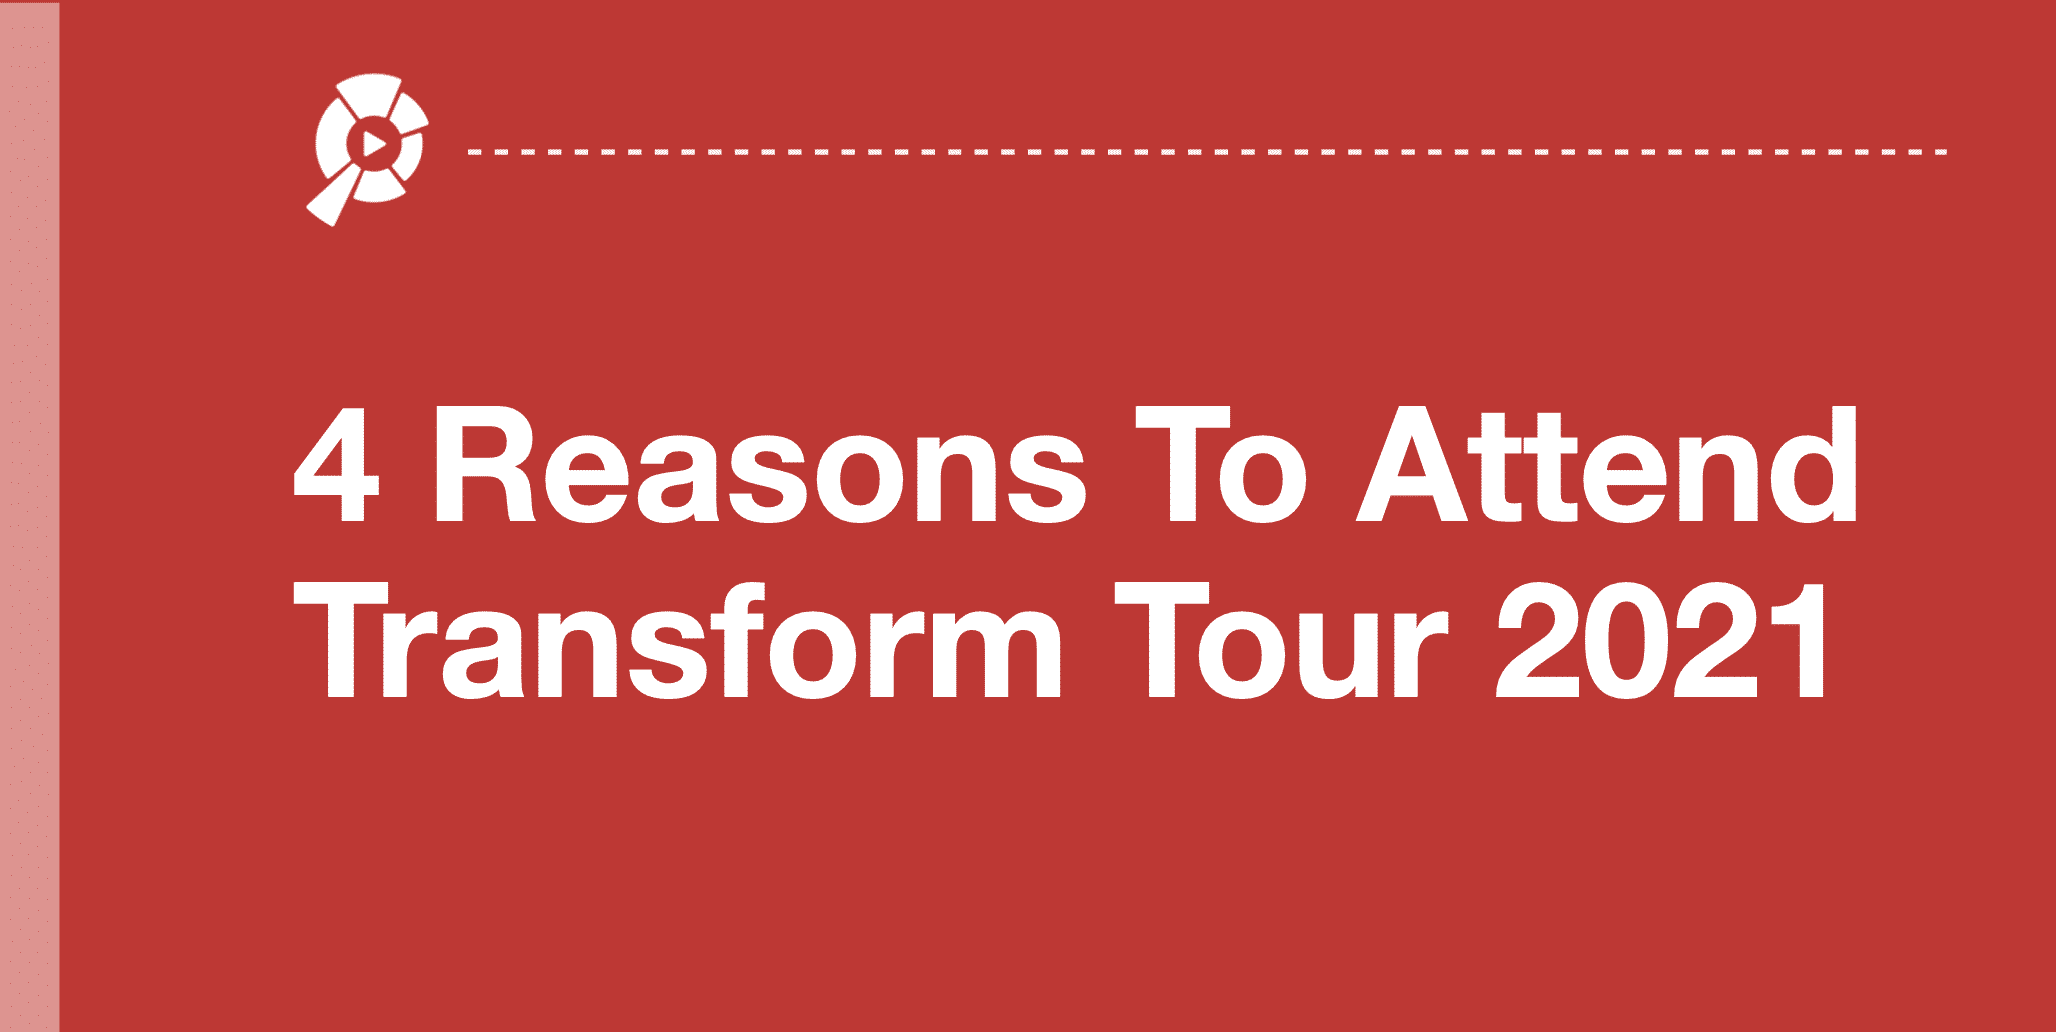 Reasons to attend transform tour 2021